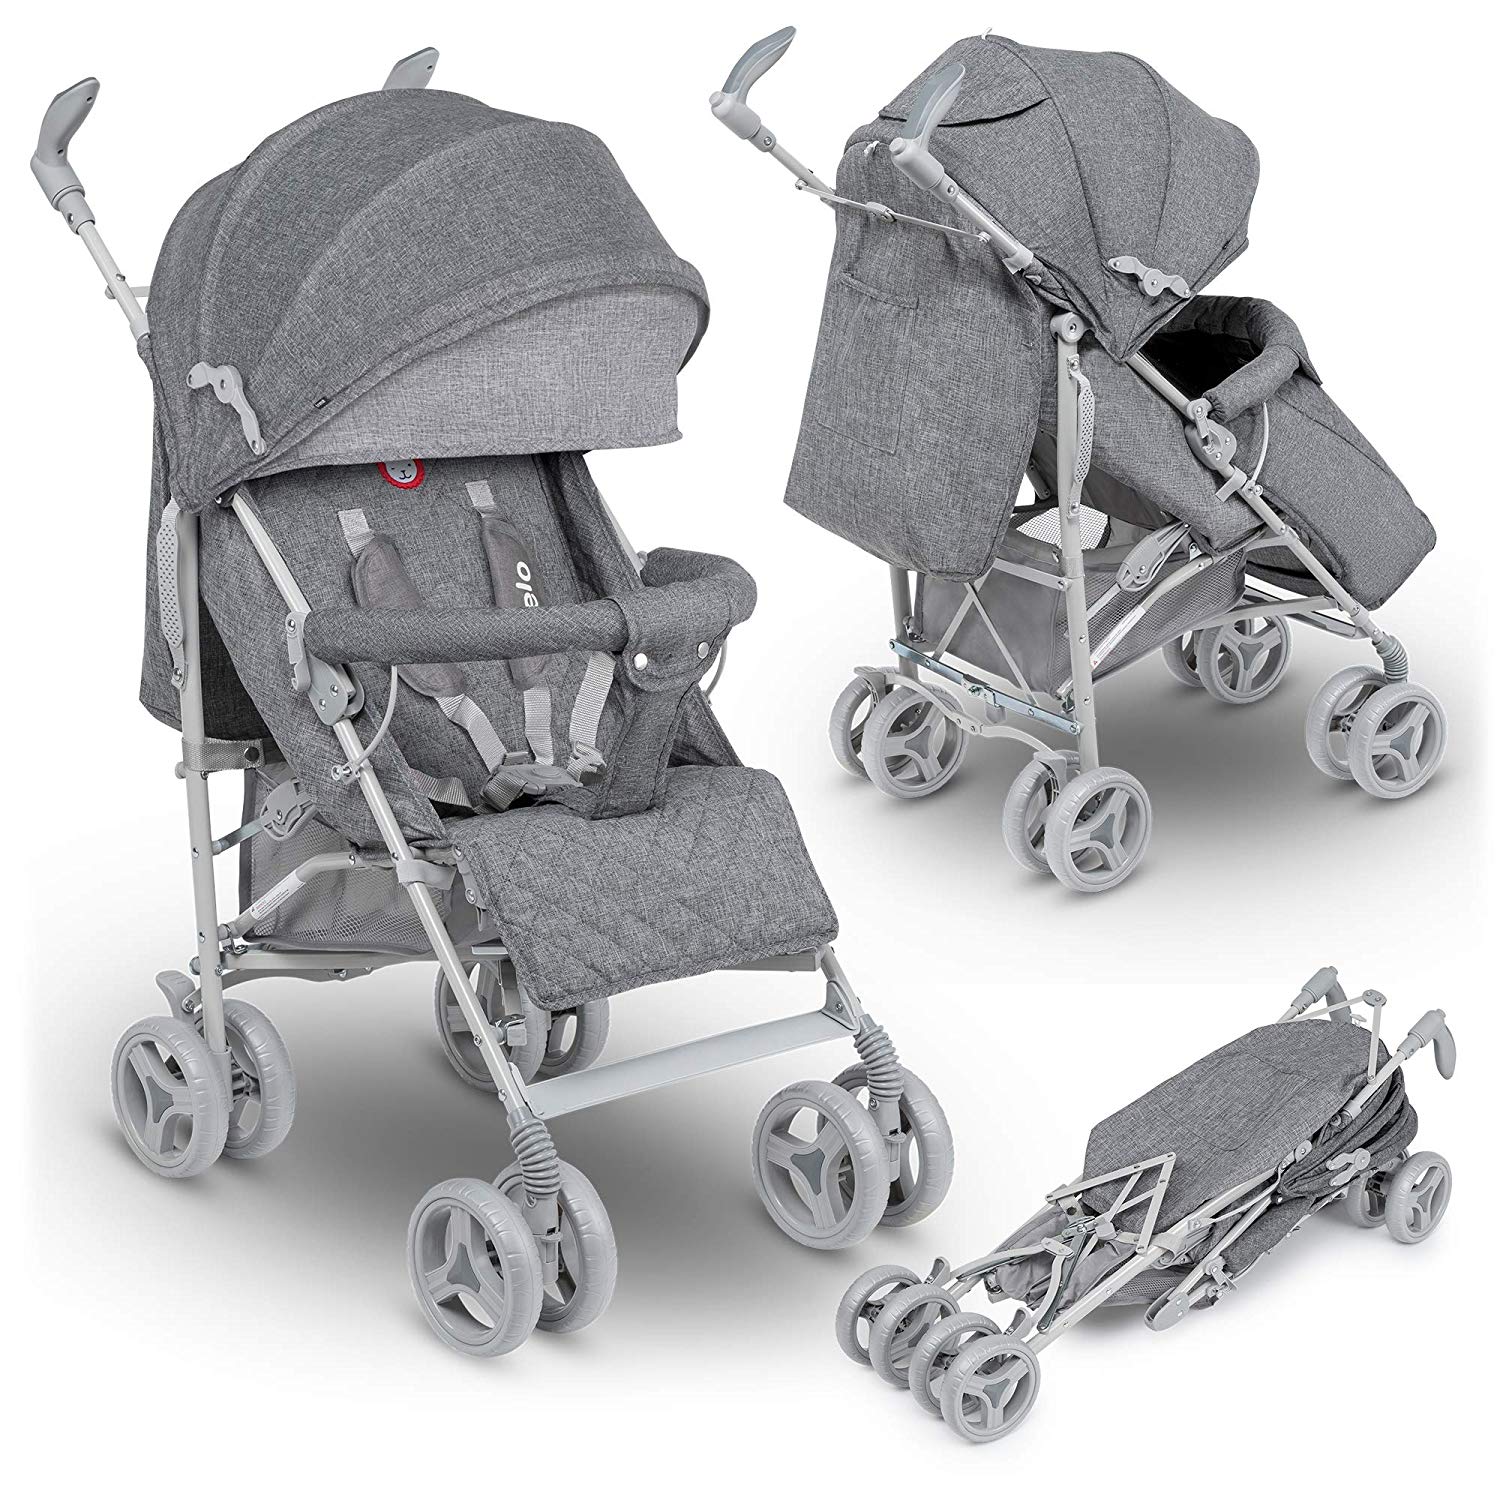 Lionelo Irma Pushchair up to 15 kg, Lightweight Modern Pushchair with Reclining Function, Foldable, Large 6 Inch Wheels, Large Basket, Bag, Mosquito Net